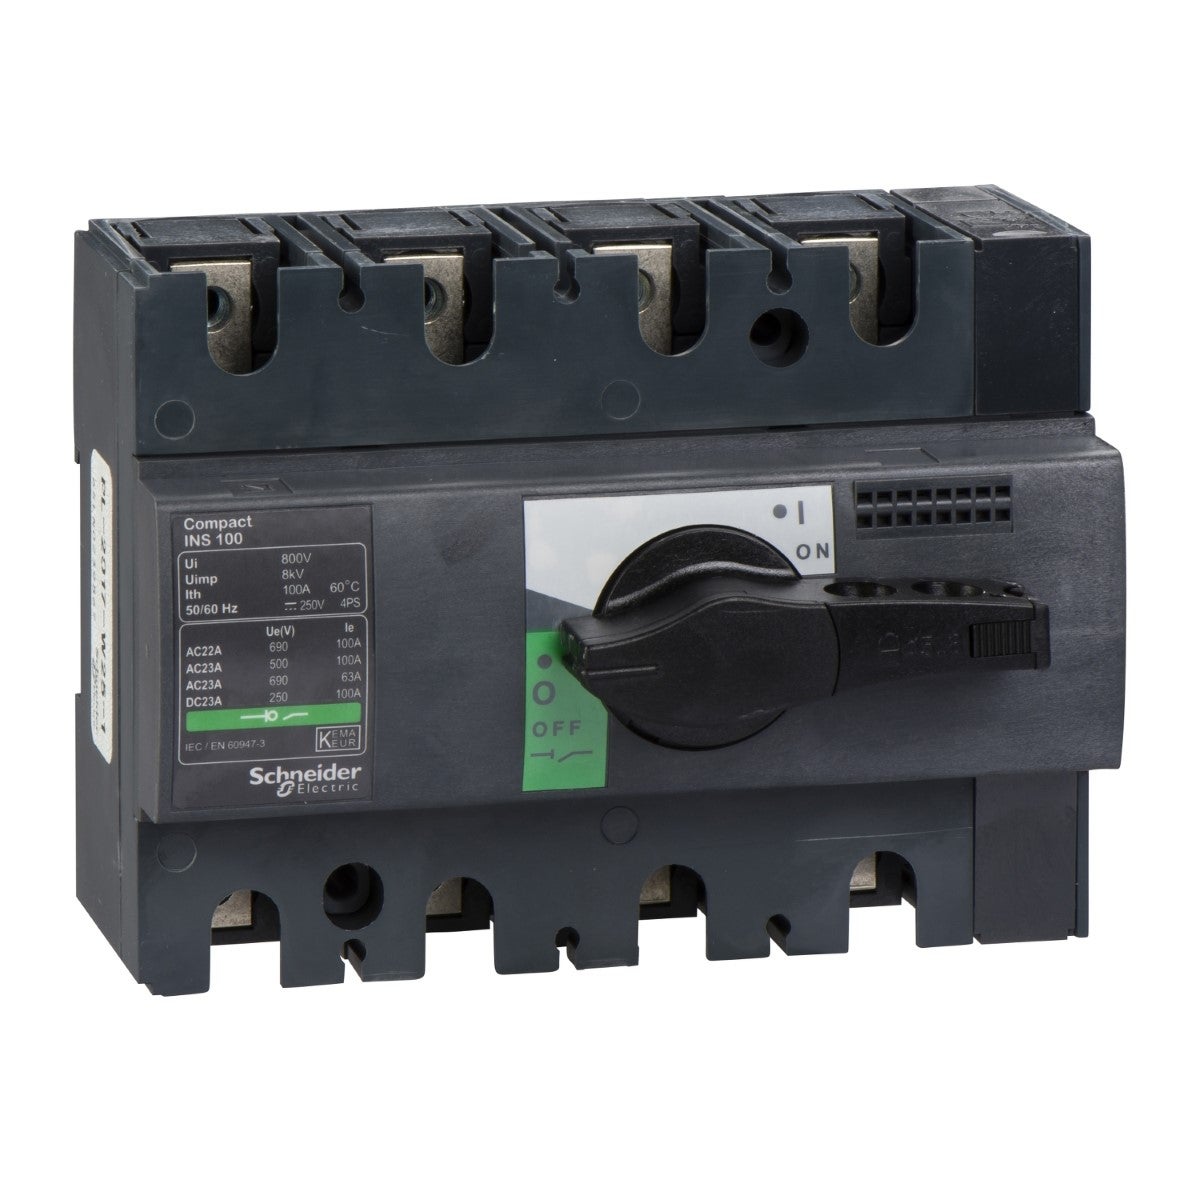 switch-disconnector Compact INS100 - 4 poles - 100 A